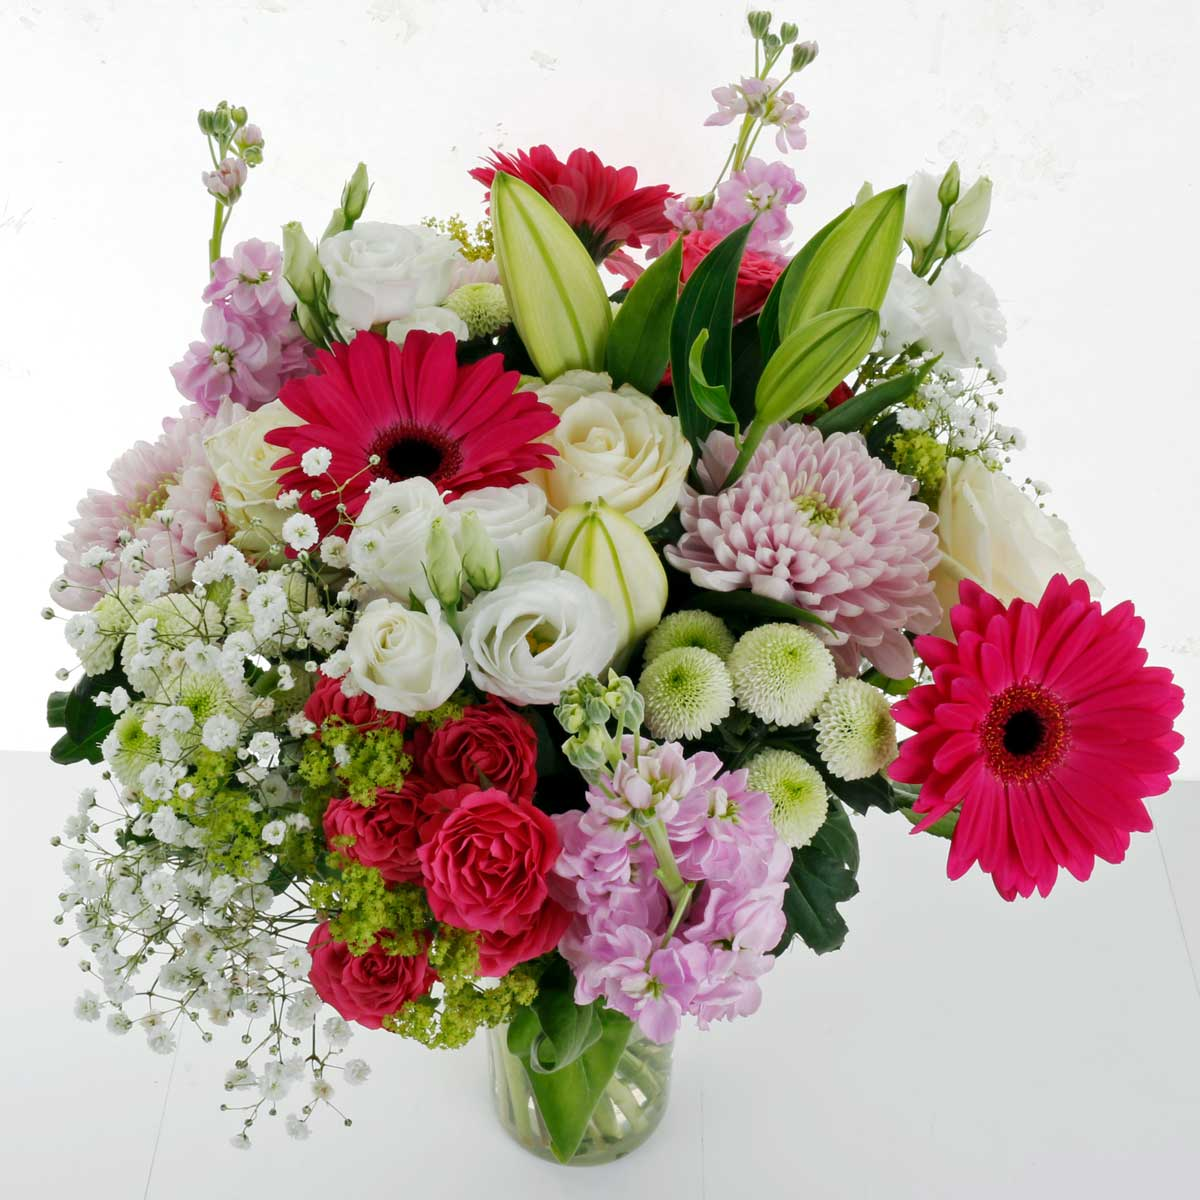 French Riviera Fresh Flowers Bouquet